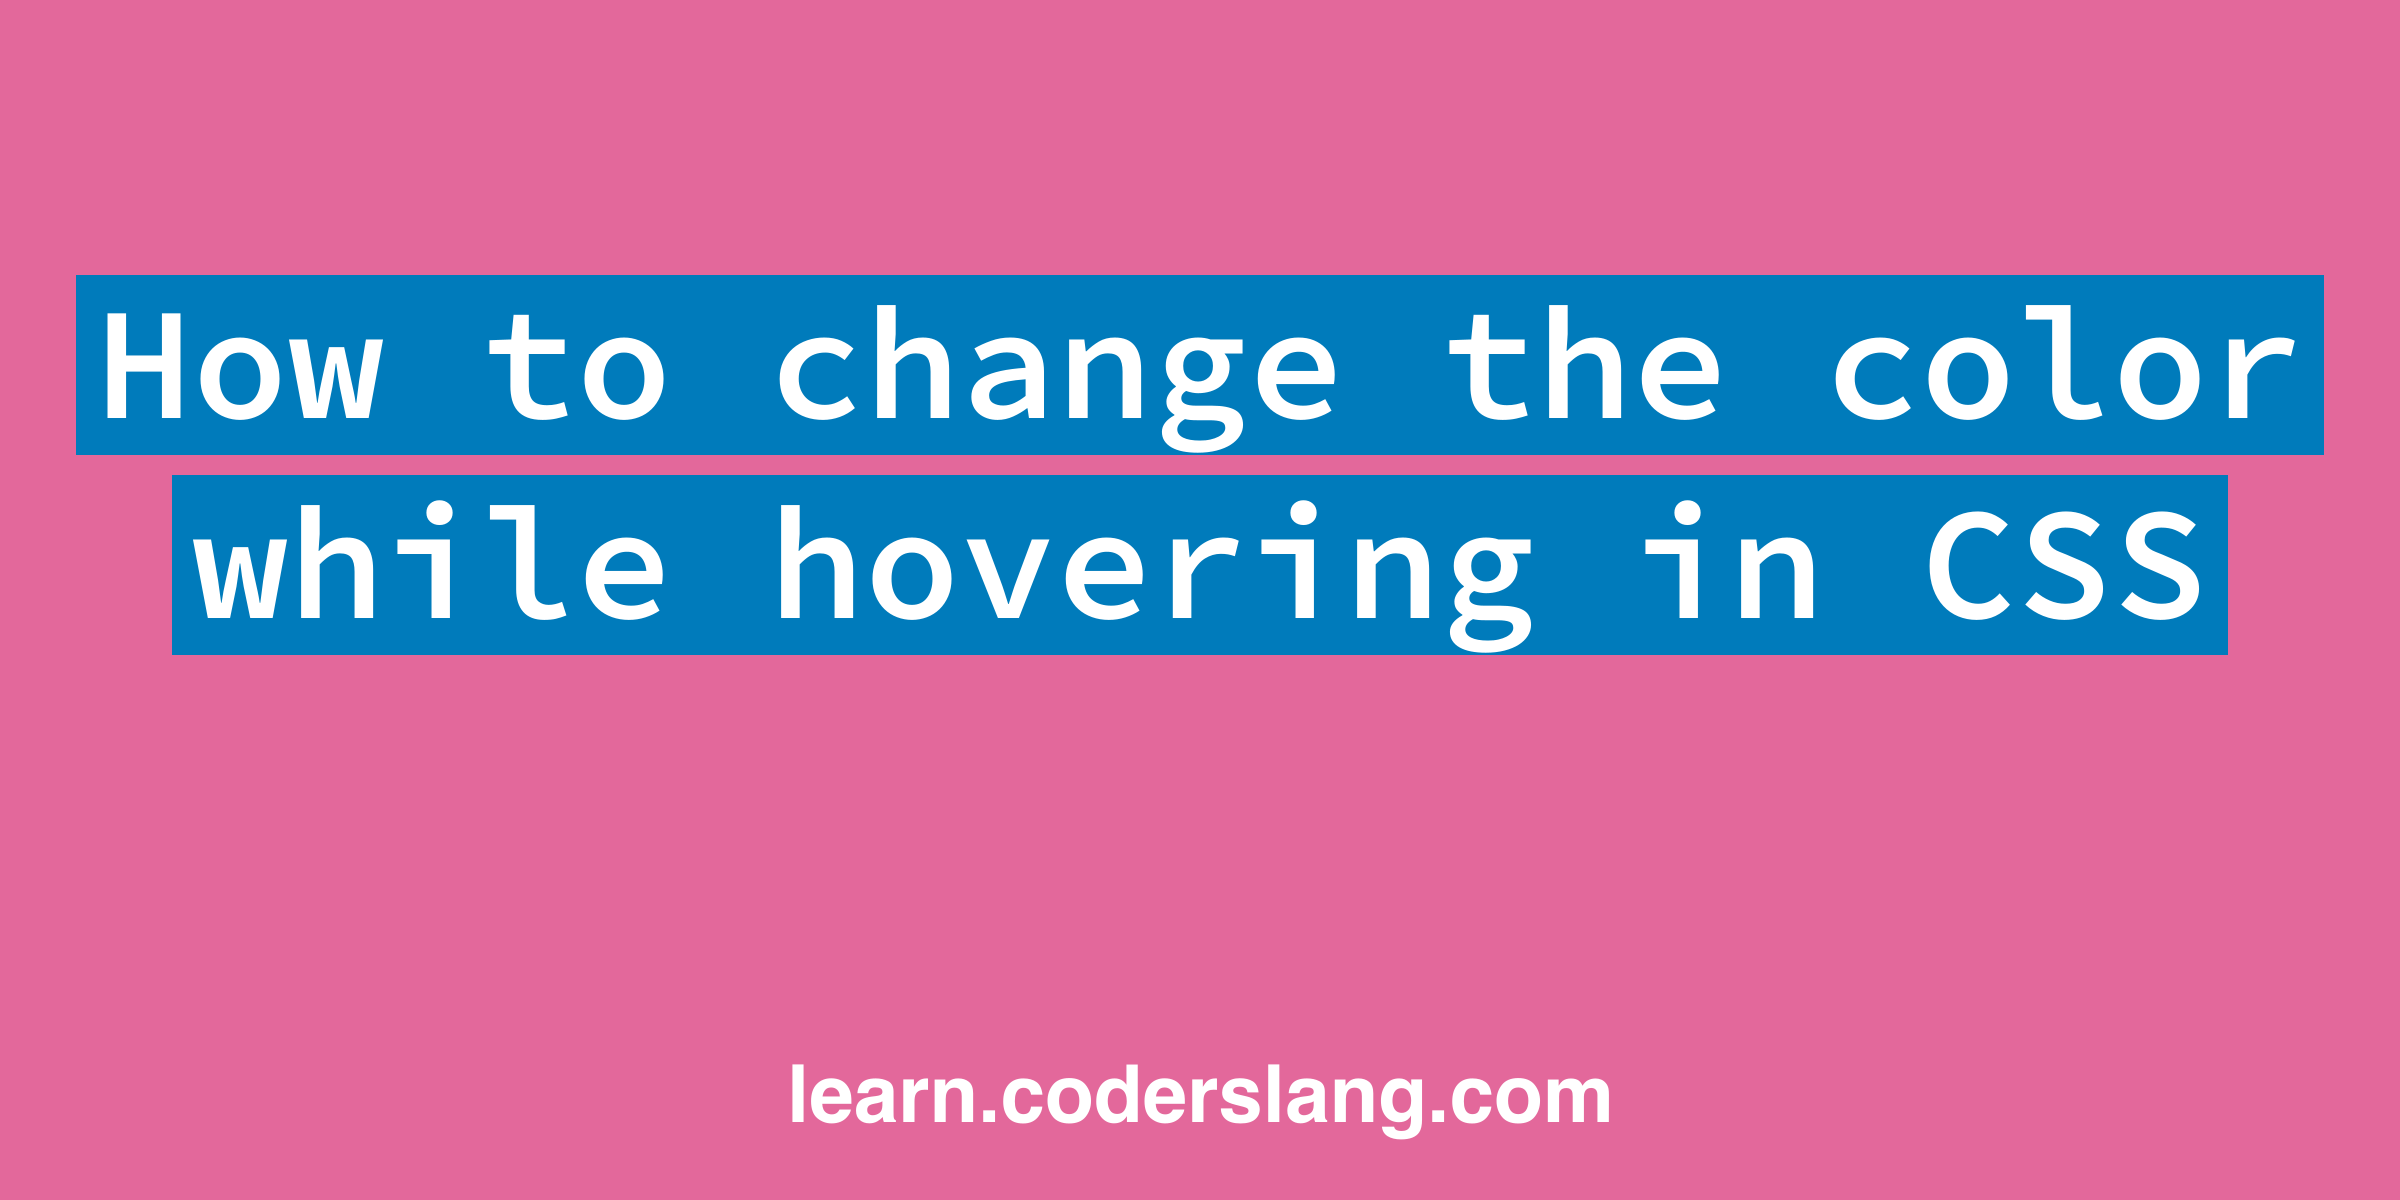 how-to-change-the-color-while-hovering-in-css